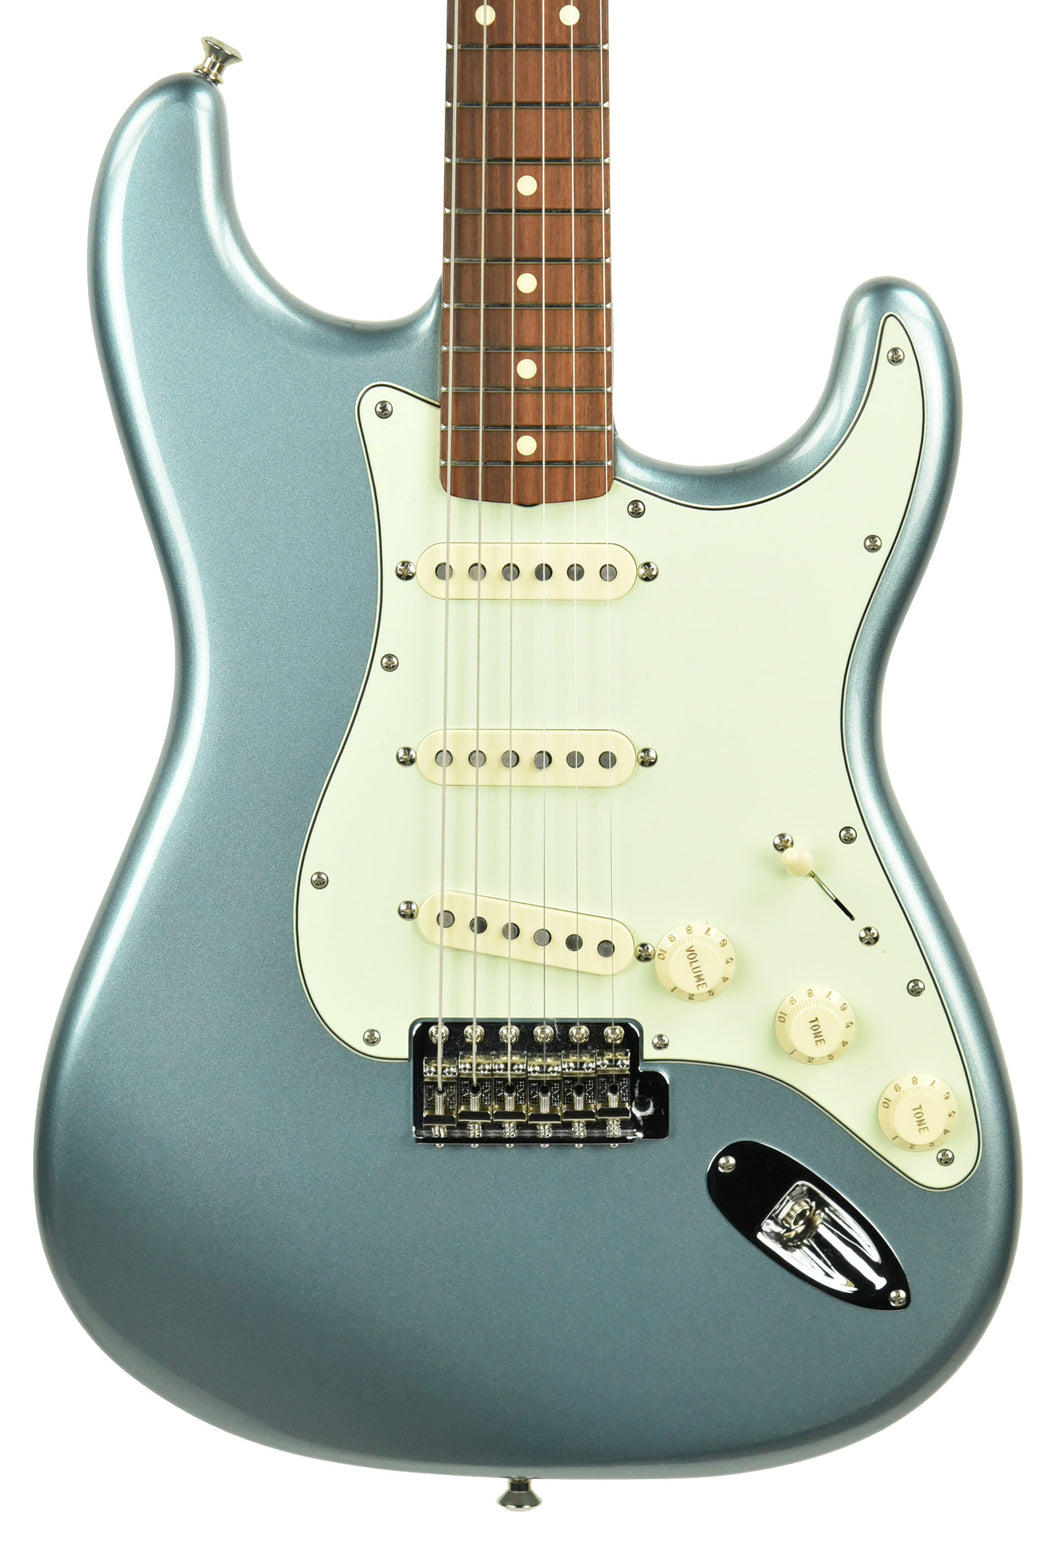 Used Fender Vintera '60s Stratocaster in Ice Blue Metallic MX19058632 - The Music Gallery